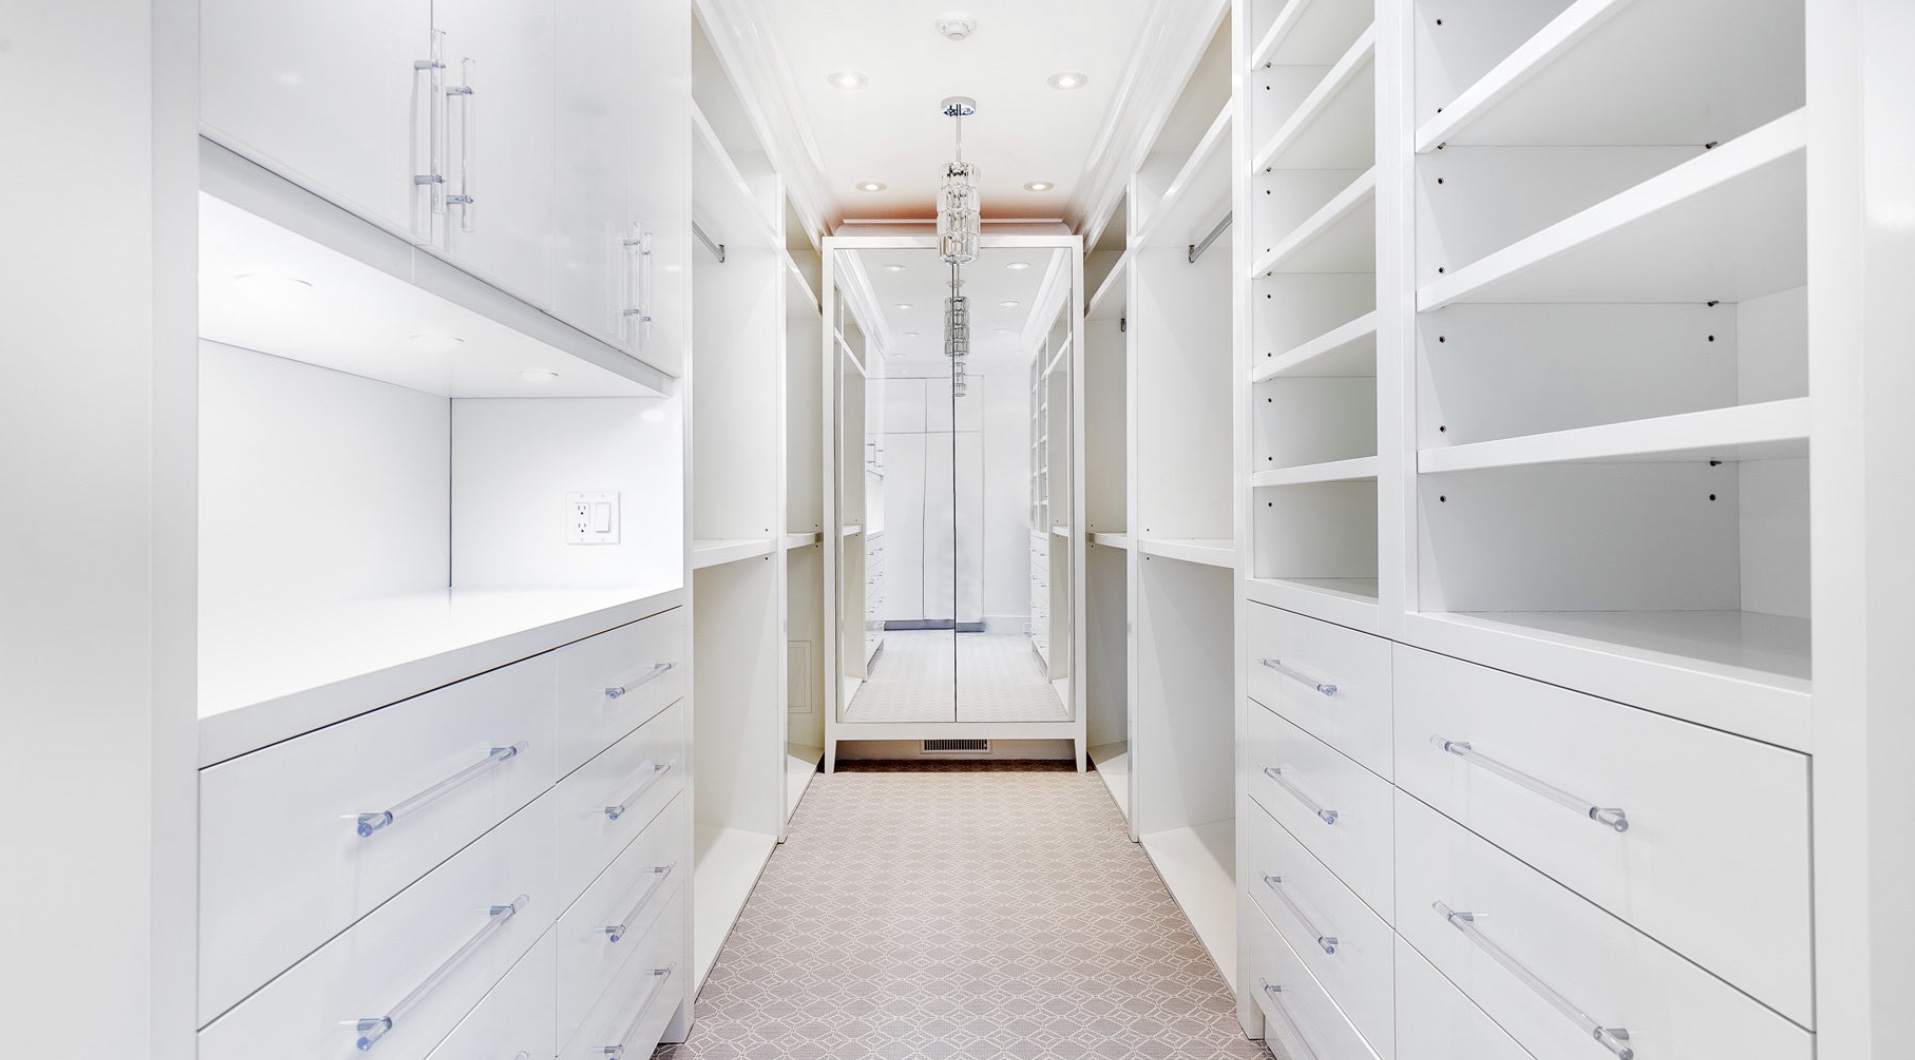 Walk-in closet with automated lighting control